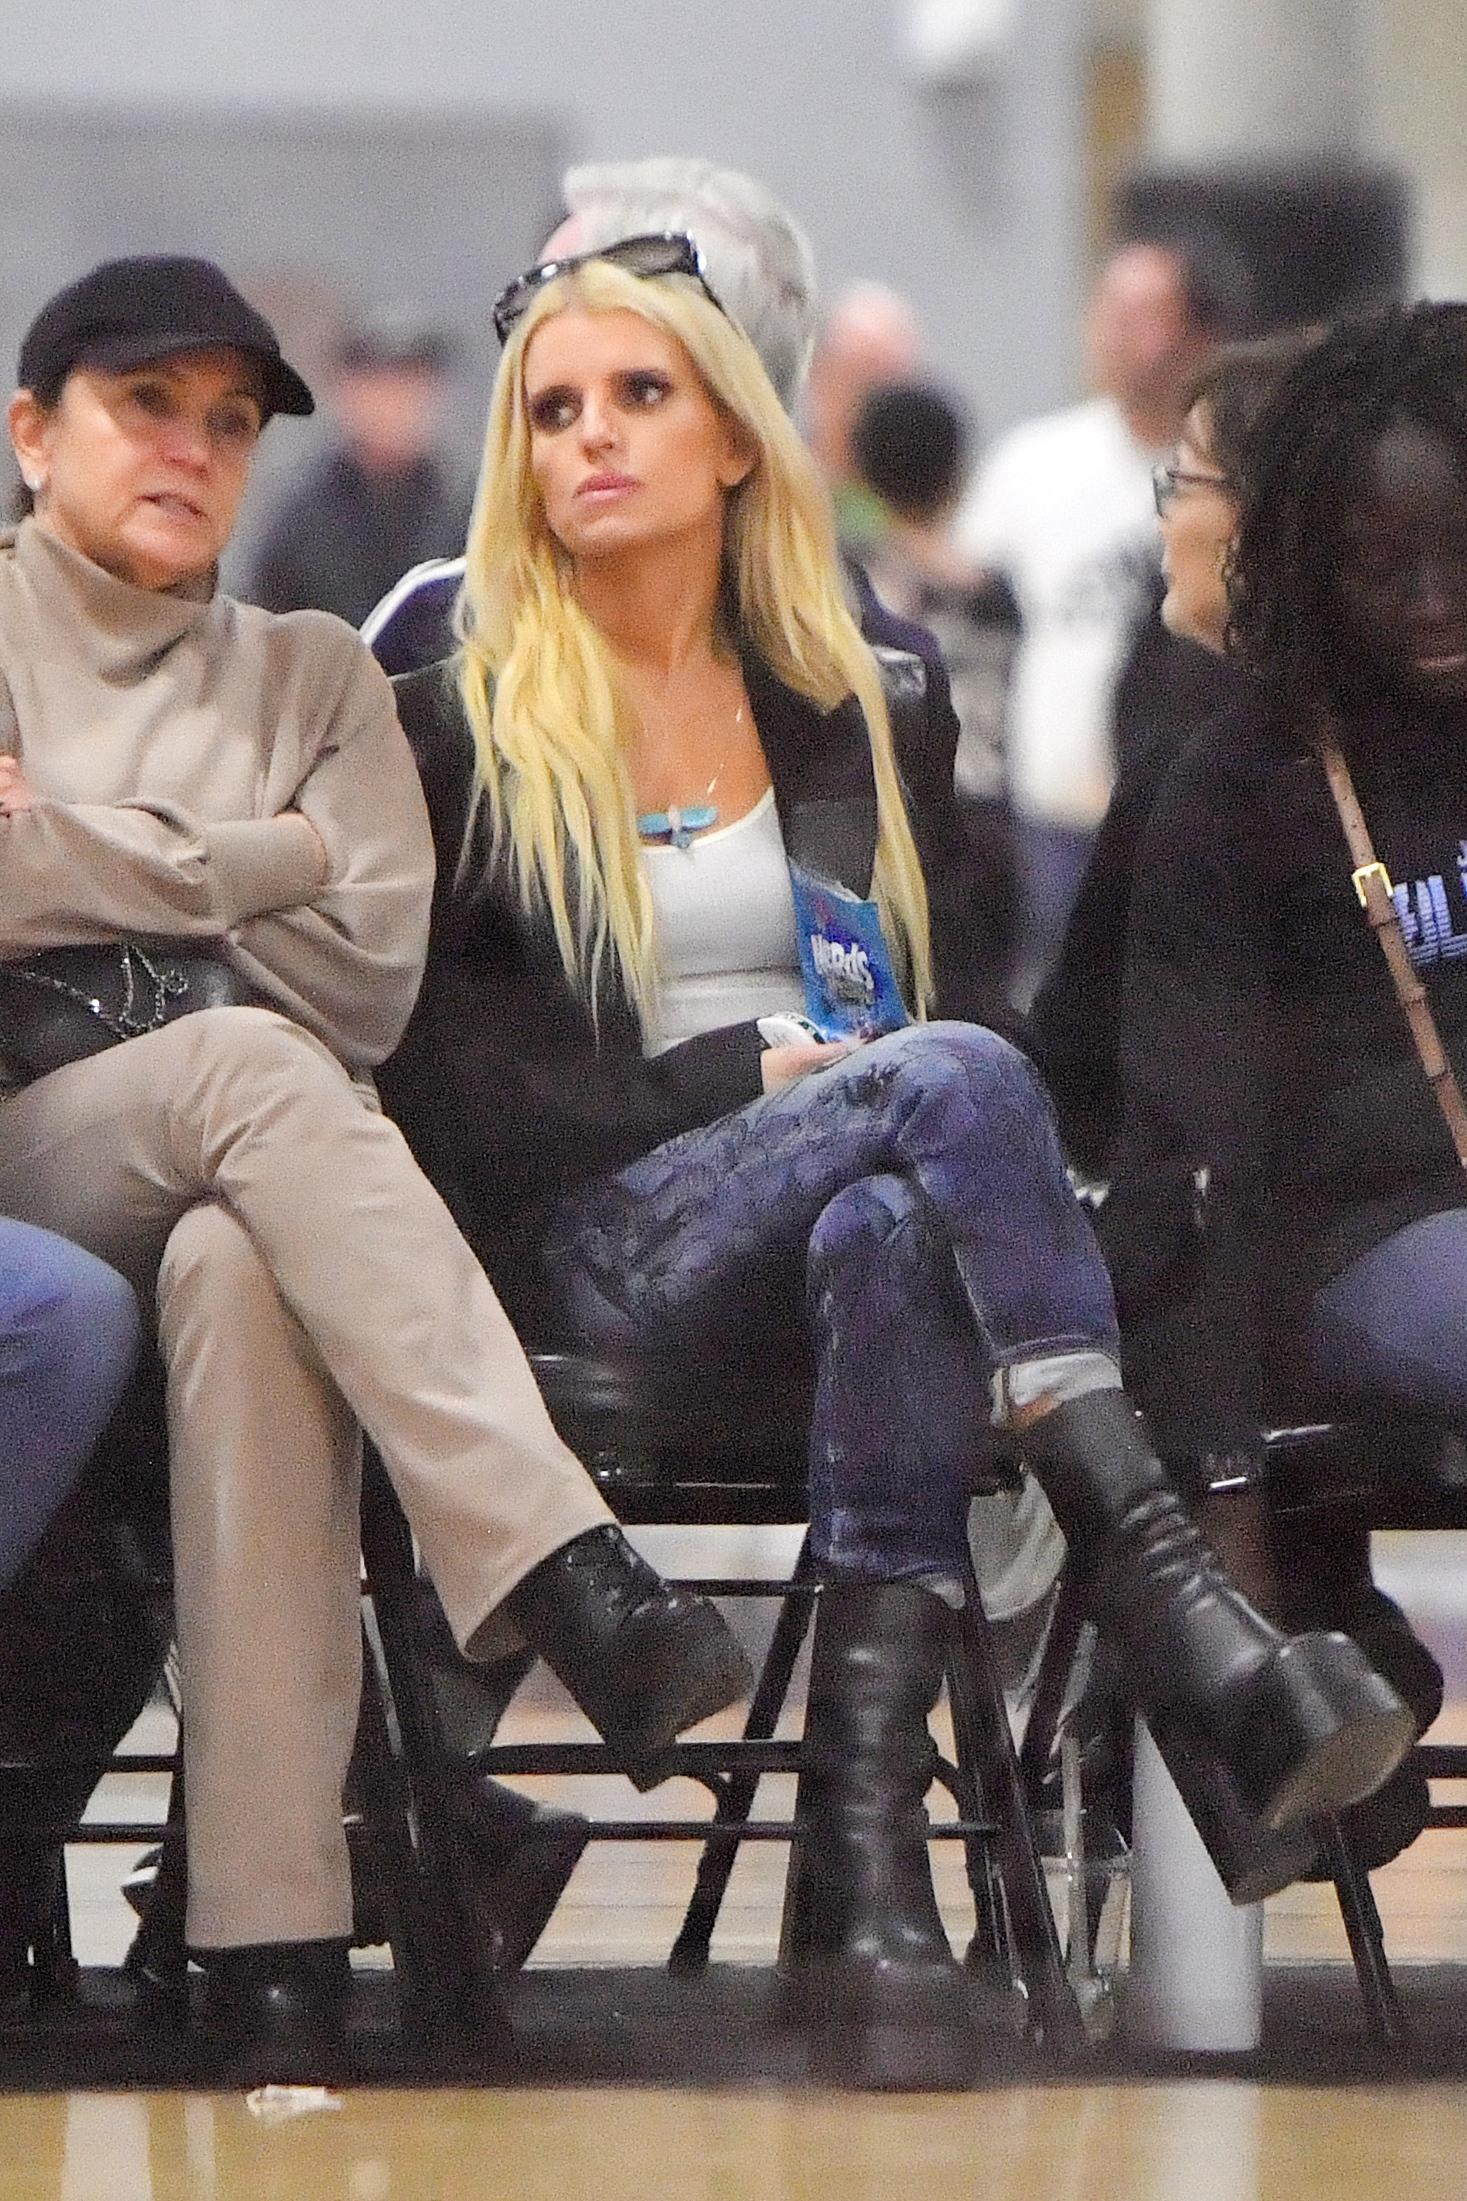 Jessica Simpson apos s weight loss is very apparent as she cheers for her daughter at her basketball game in Calabasas